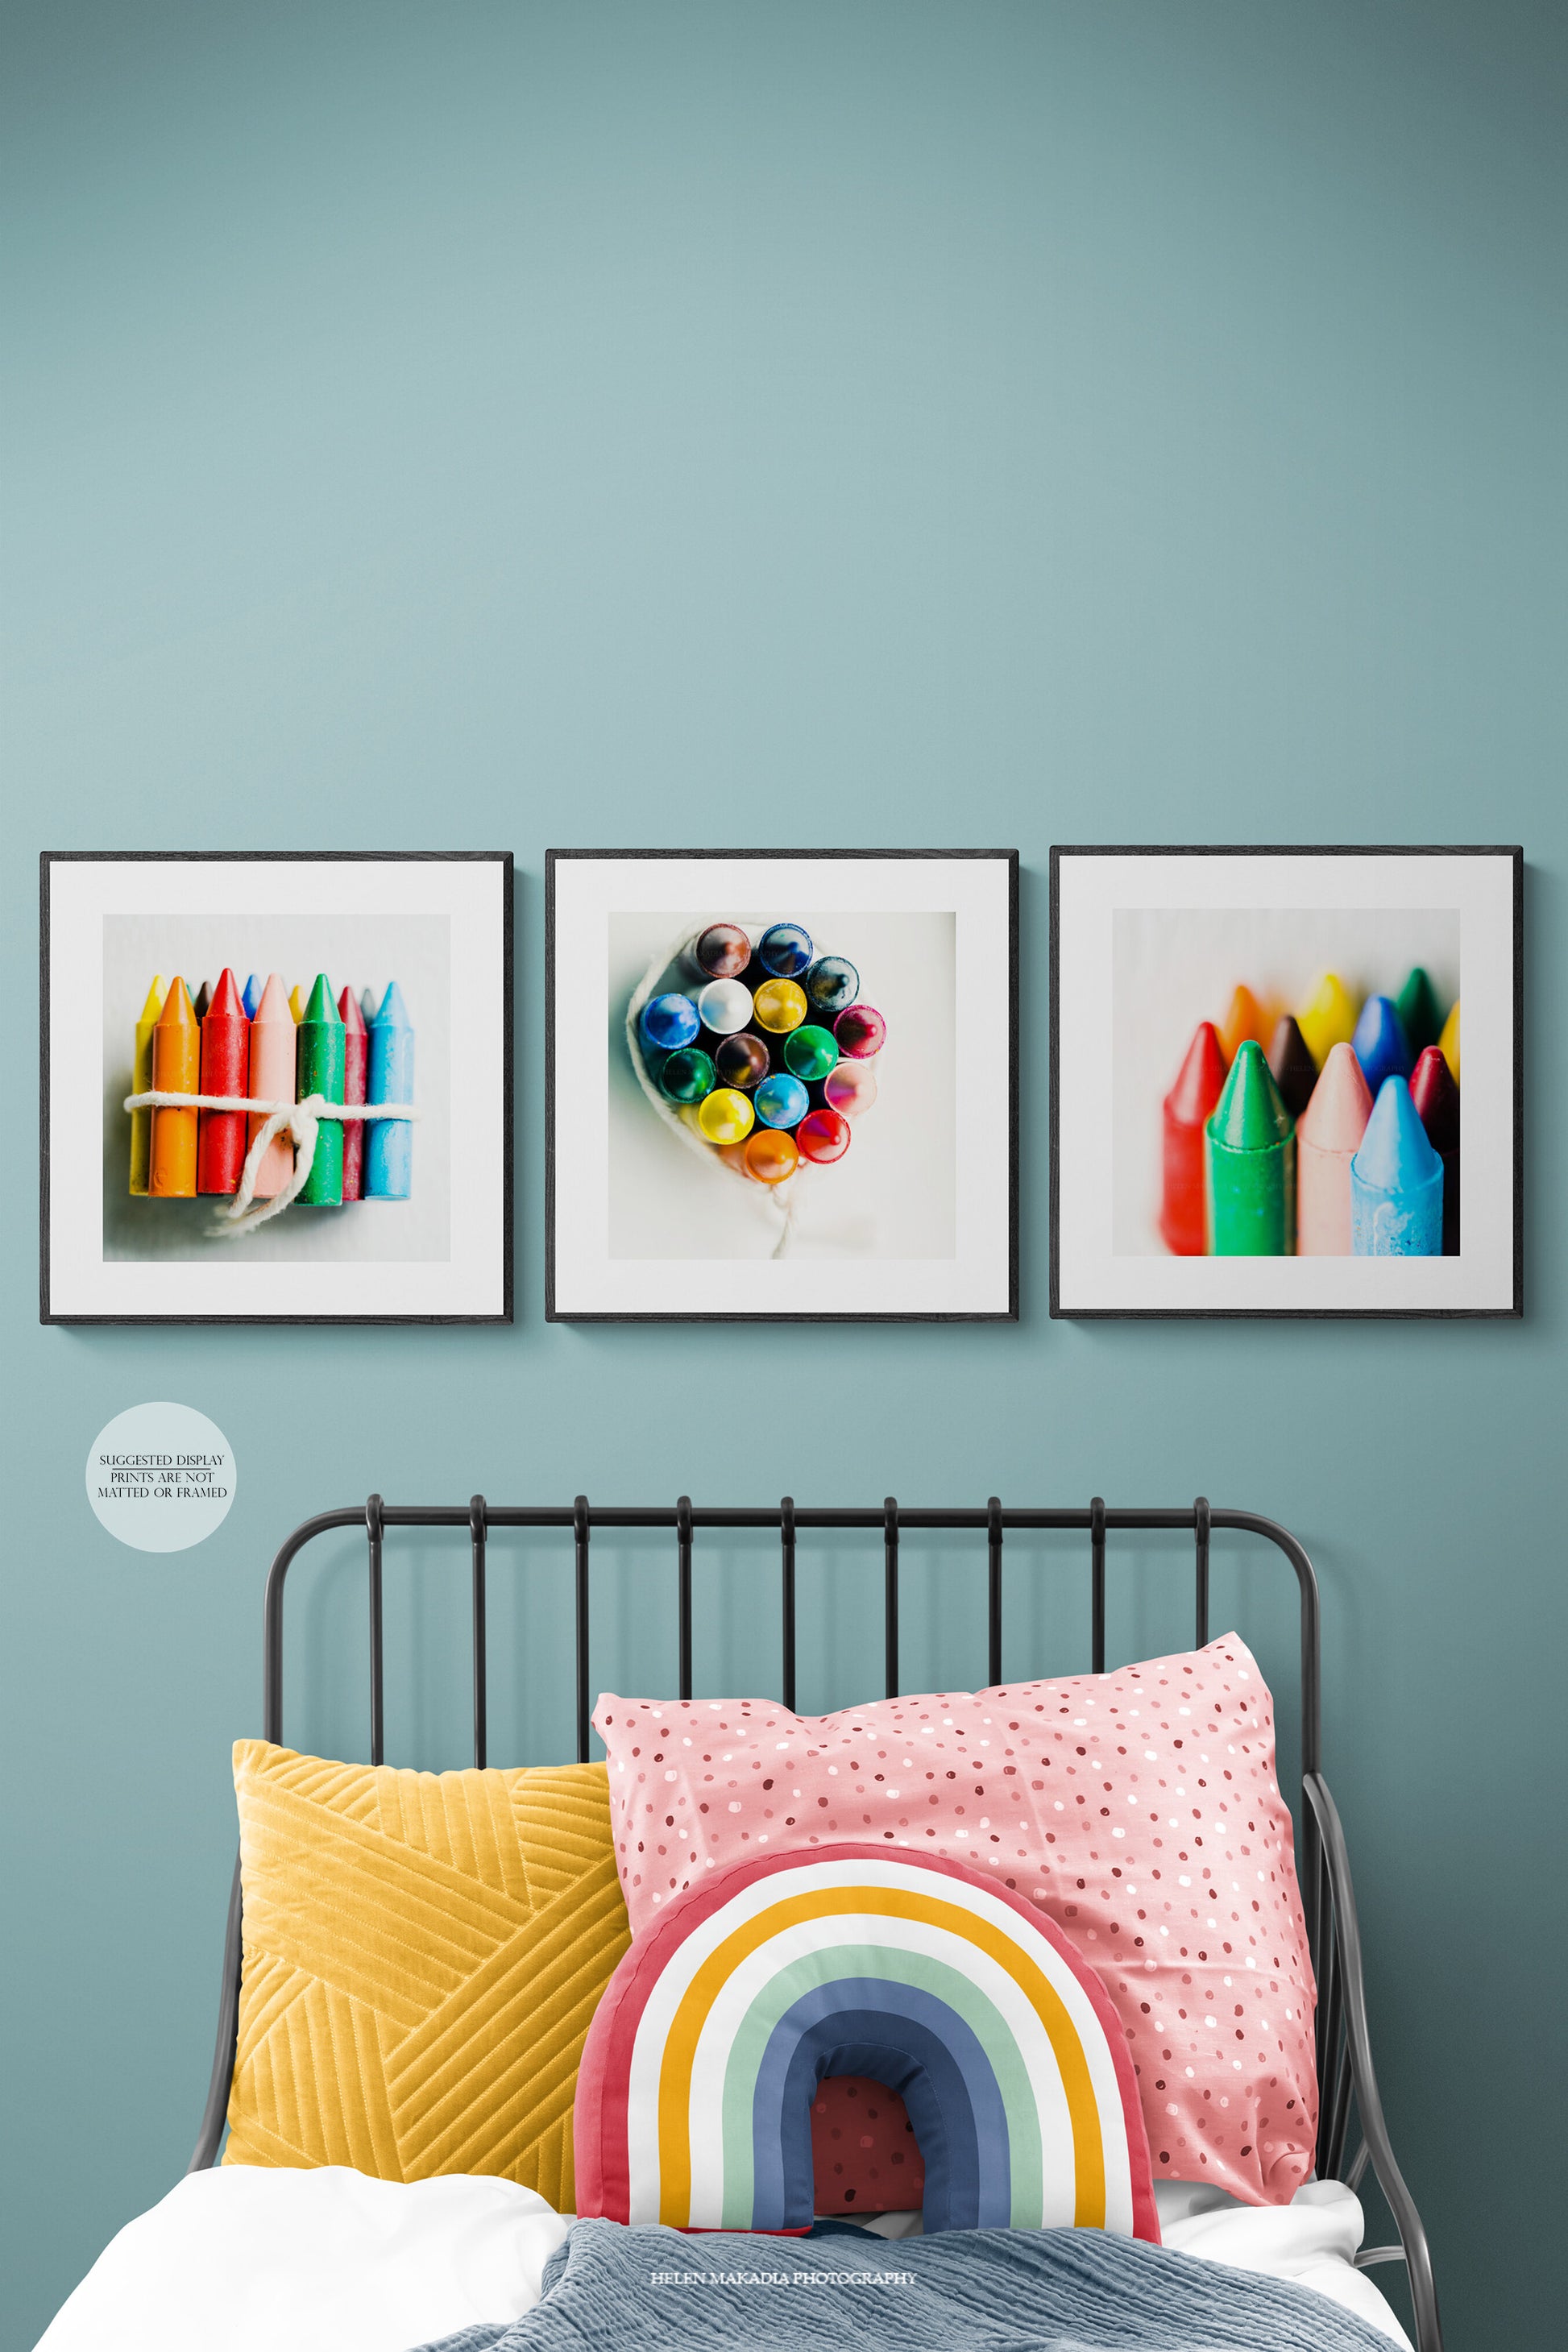 Set of 3 Photographs of a bundle of Crayons as Wall Art in a Kids Rooms